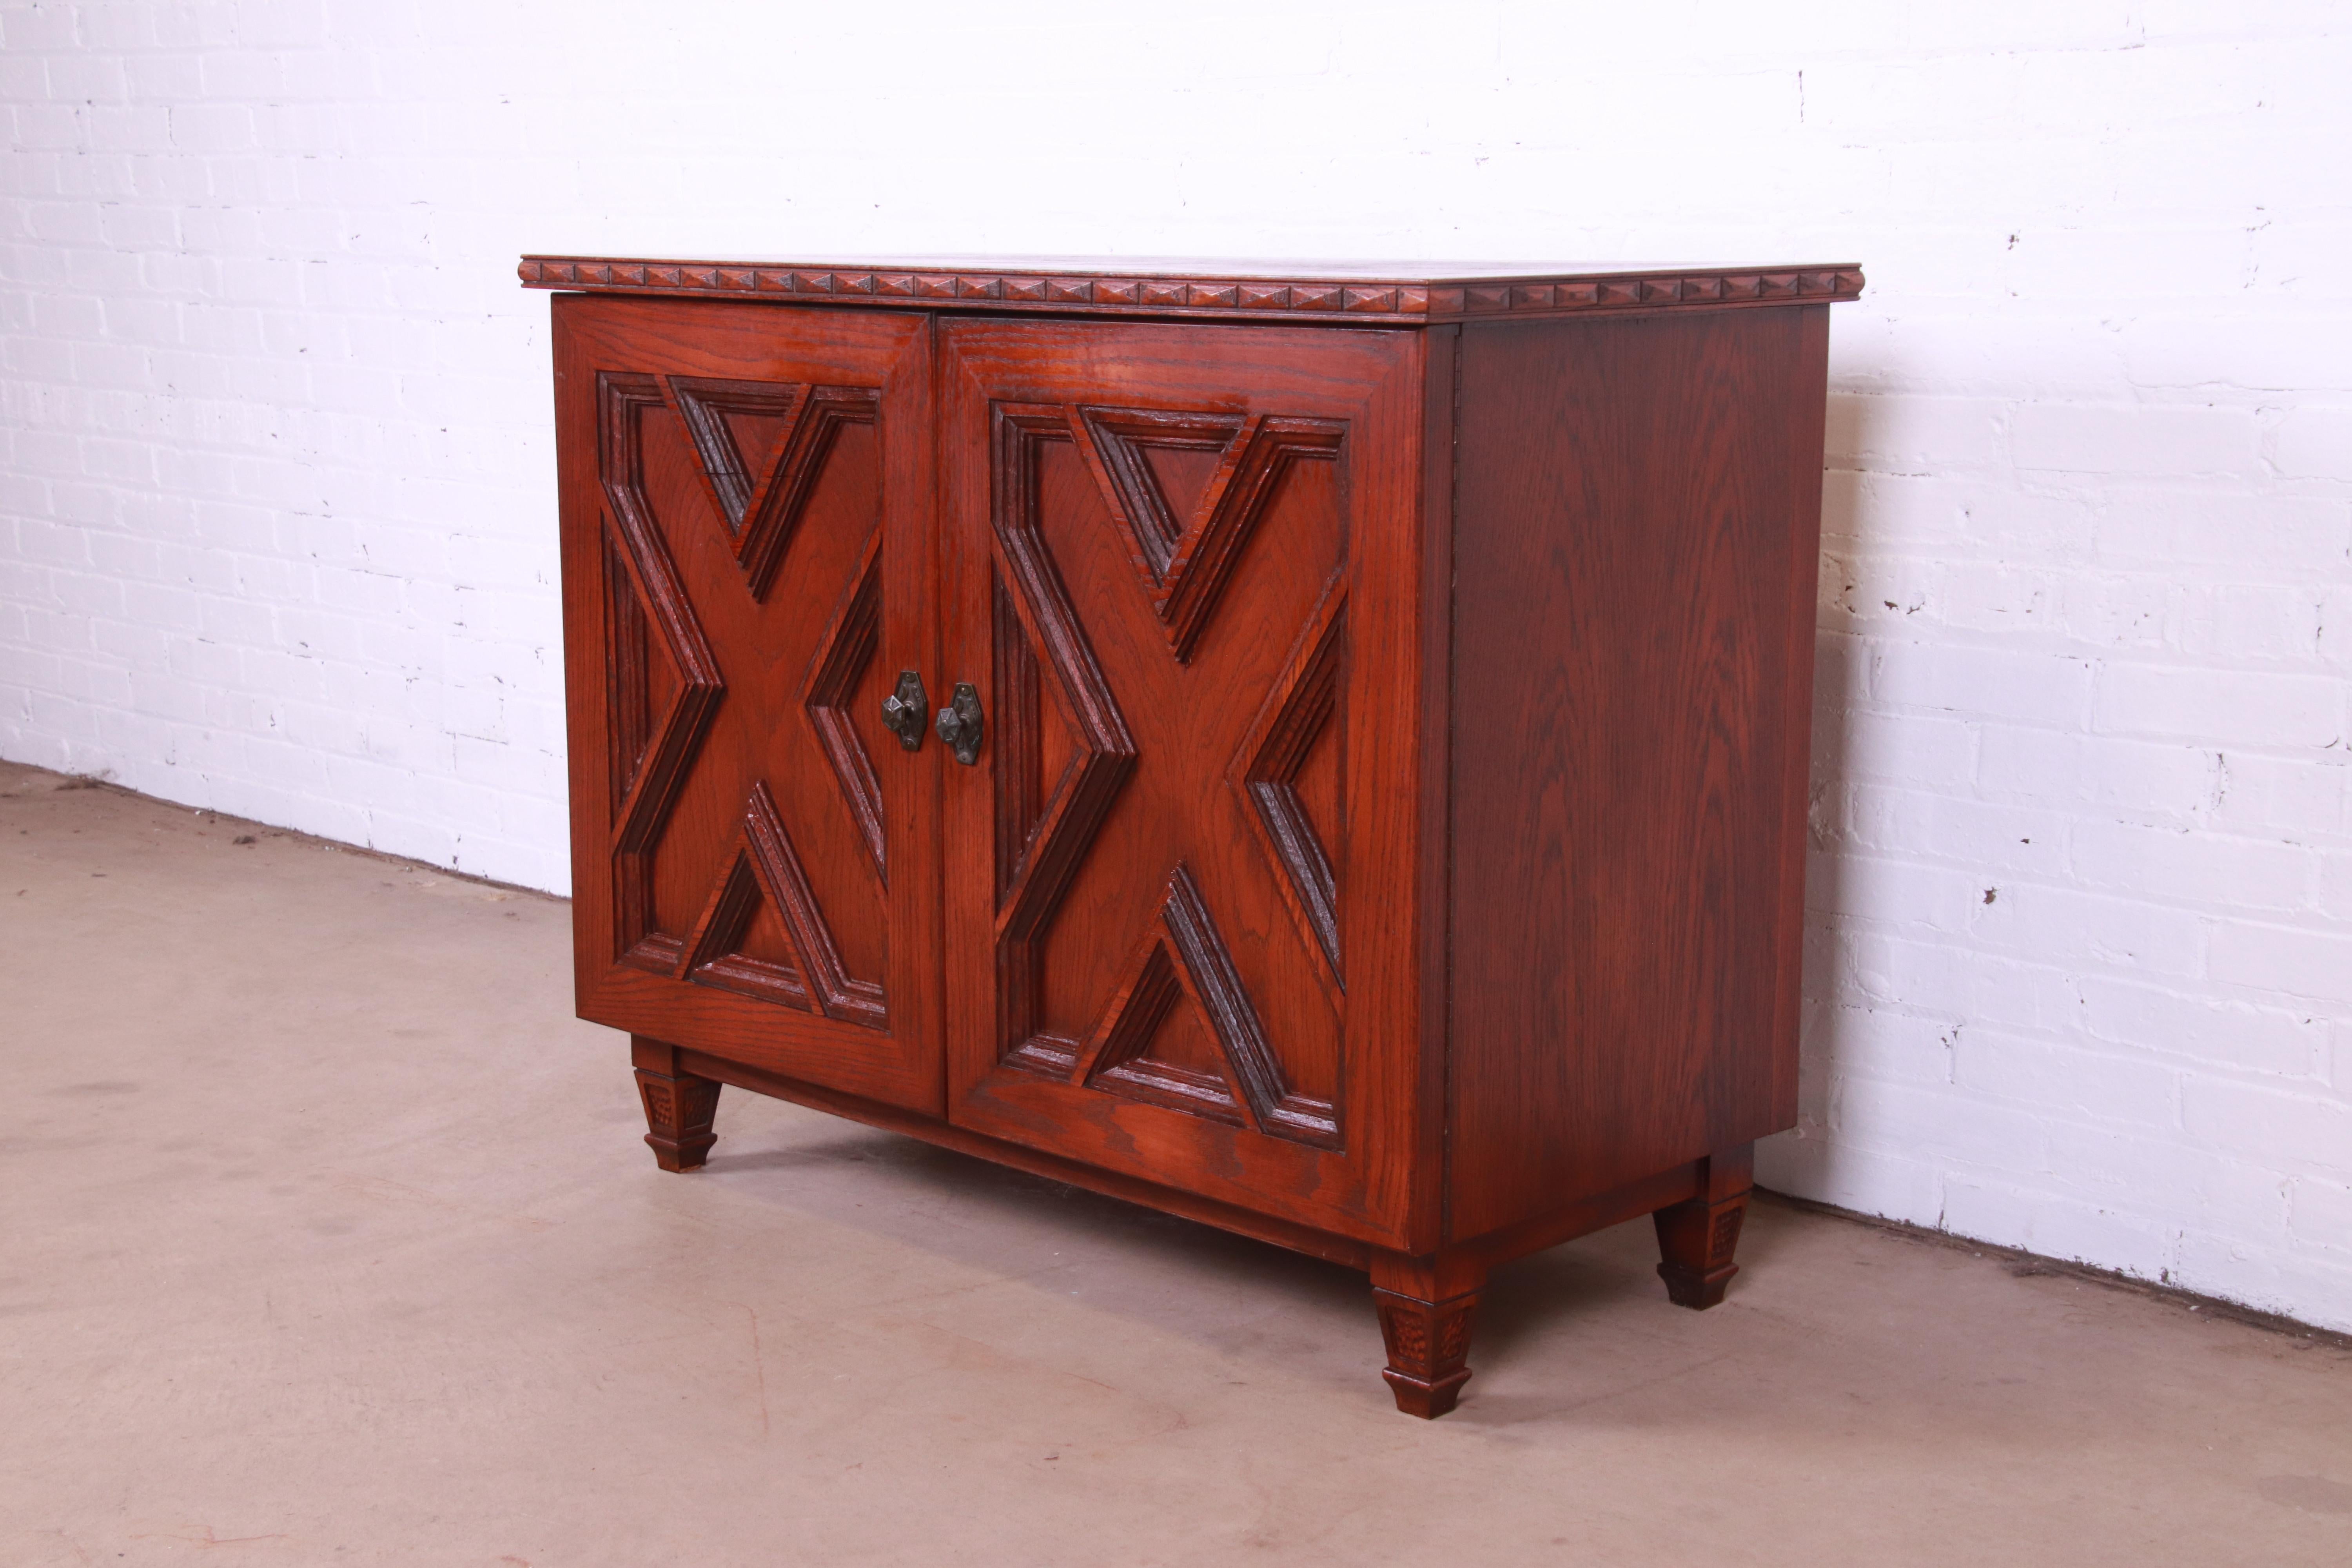 An exceptional rustic lift top bar cabinet

By Romweber, 